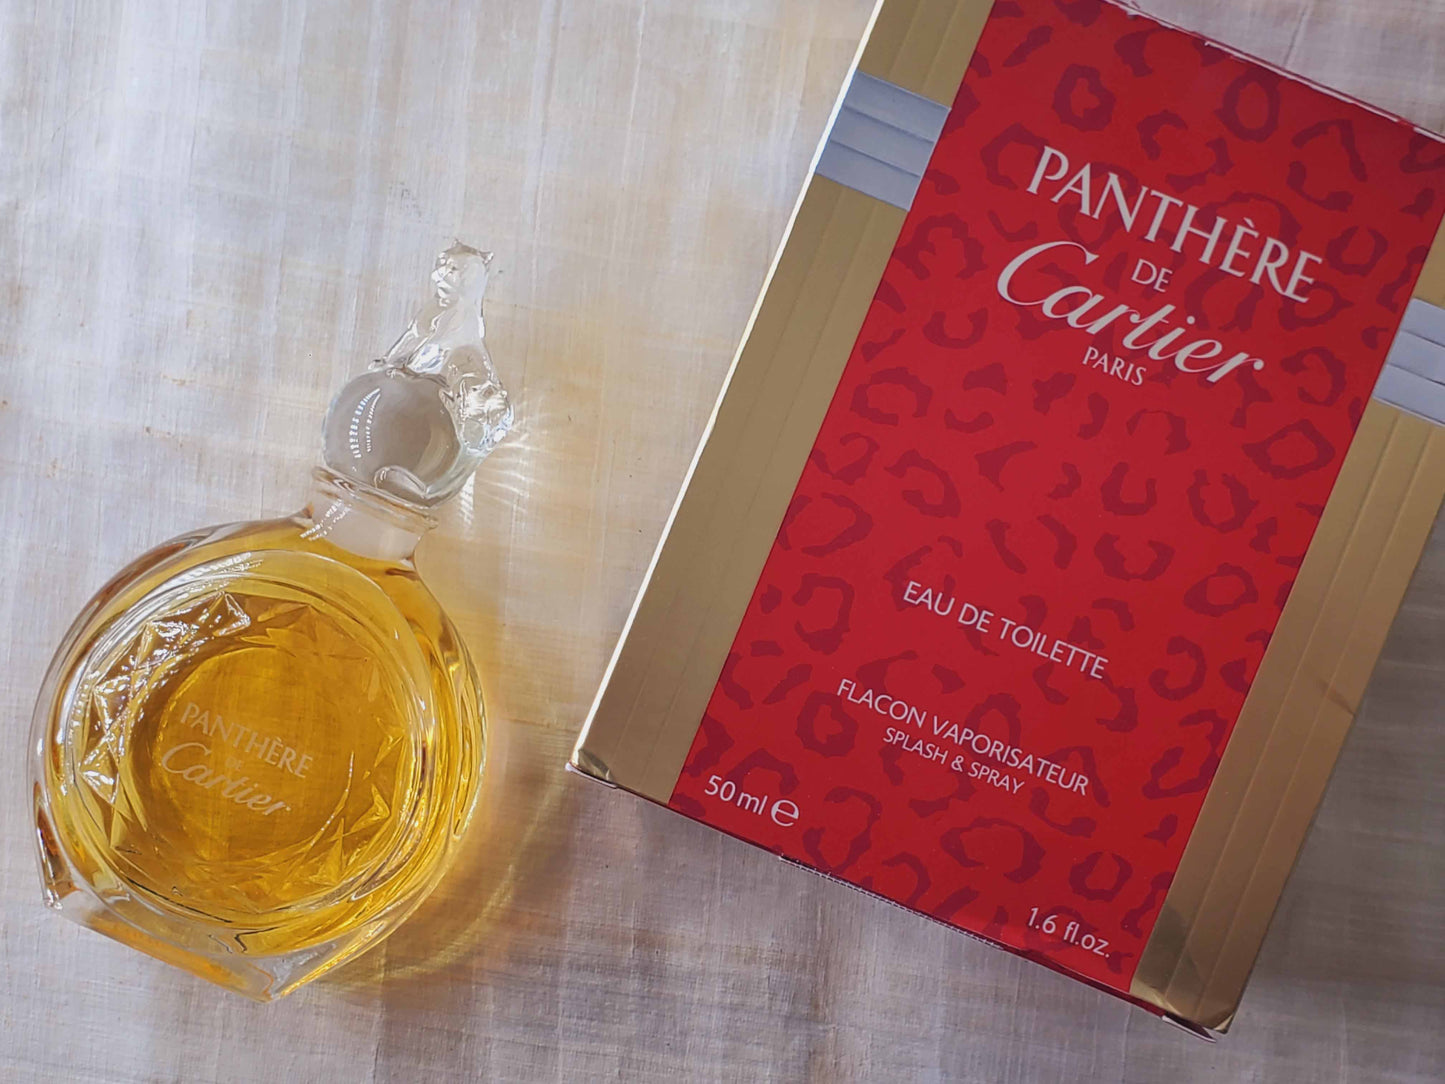 Cartier Panthere EDT Splash Bottle Glass Panther Stopper 50 ml 1.6 oz, Rare, Vintage, Pre-owned, Level As Pictured